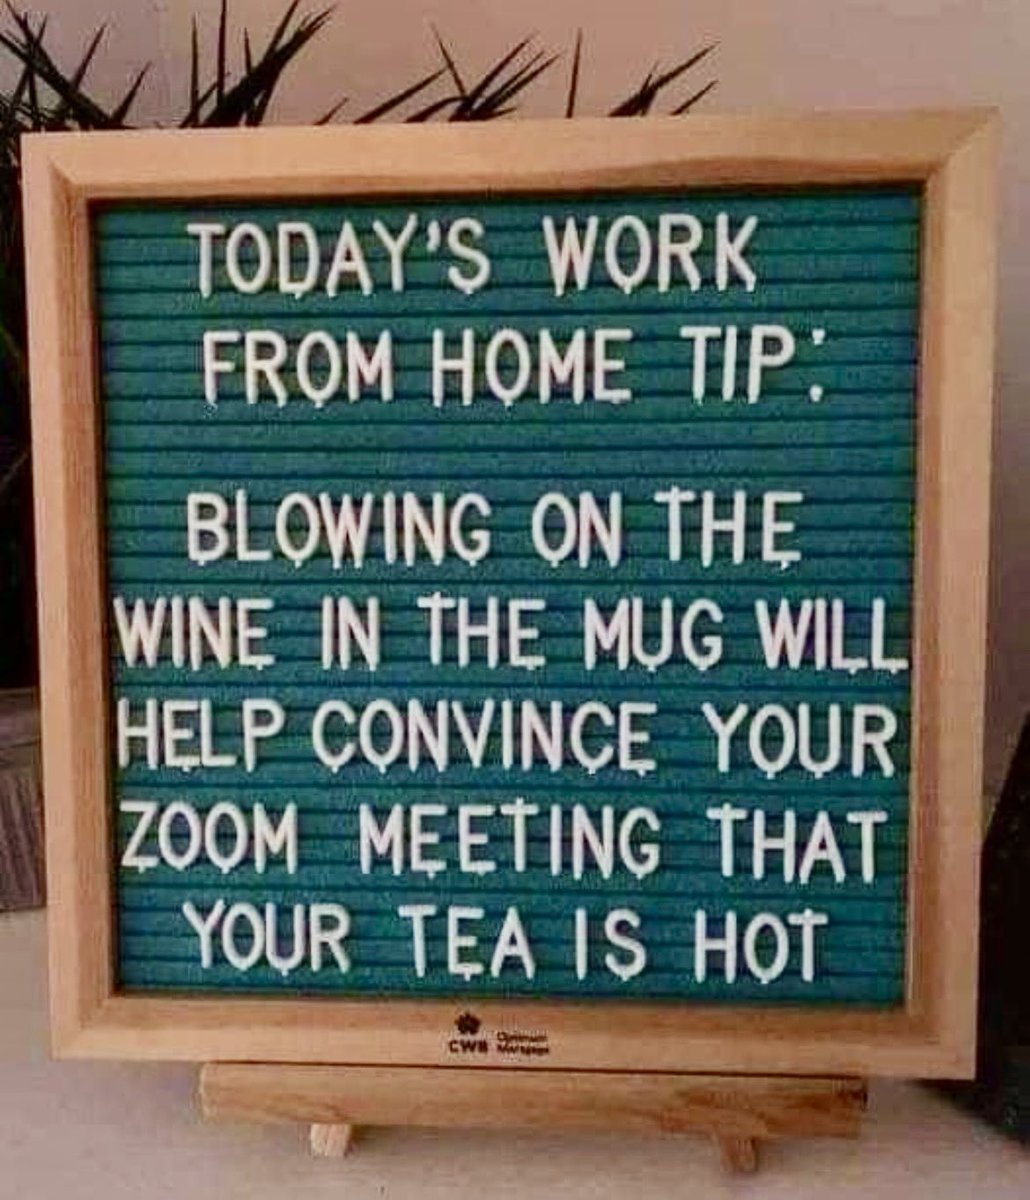 Follow me for more WFH tips ☕️ =🍷, and have a ‘chuckle-of-a-Tuesday’, Folks! 😁 …OH…and don’t forget to smile 😉🤙🏼. #WorkFromHome #worklife 👩🏻‍💻